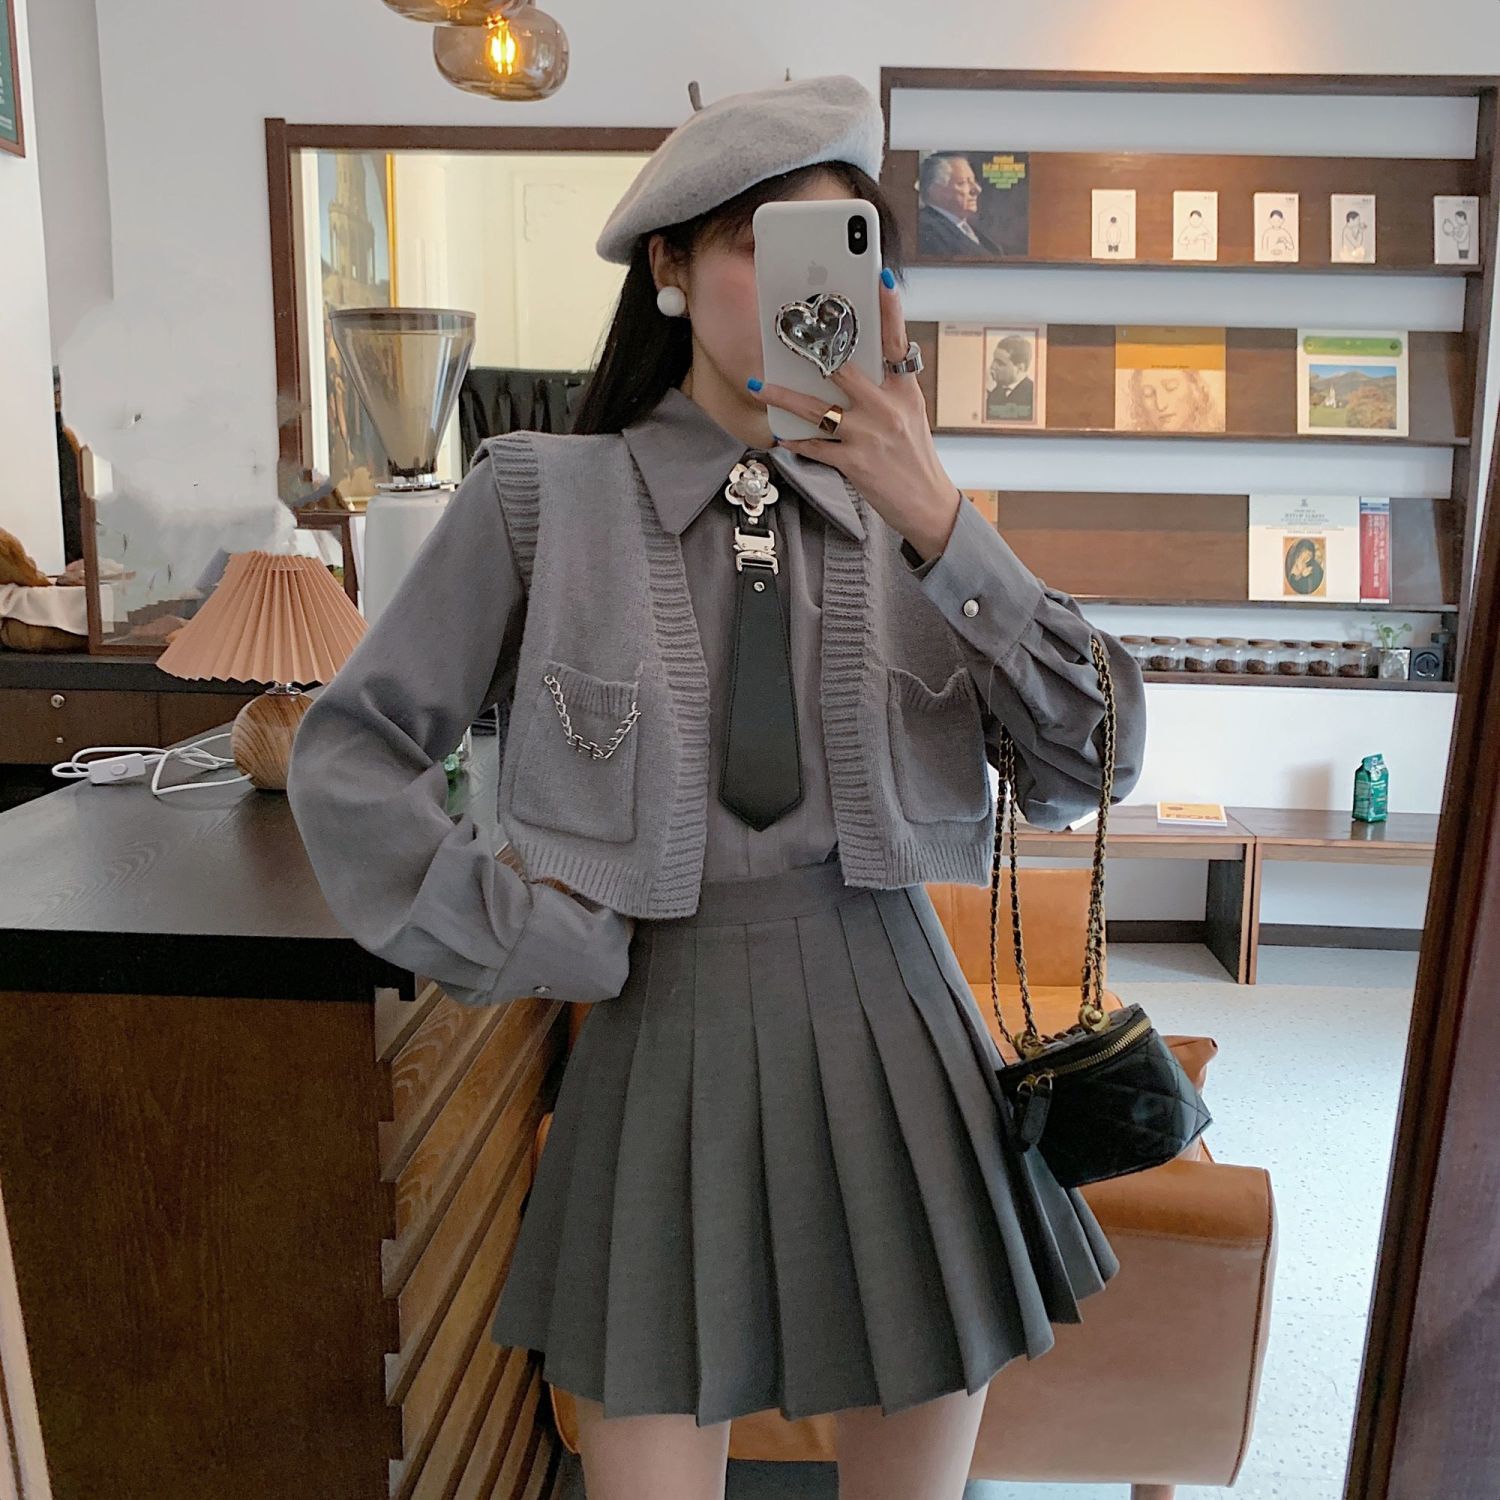 Salt series small suit 2022 new college wind tie shirt sweater vest pleated skirt two-piece suit female